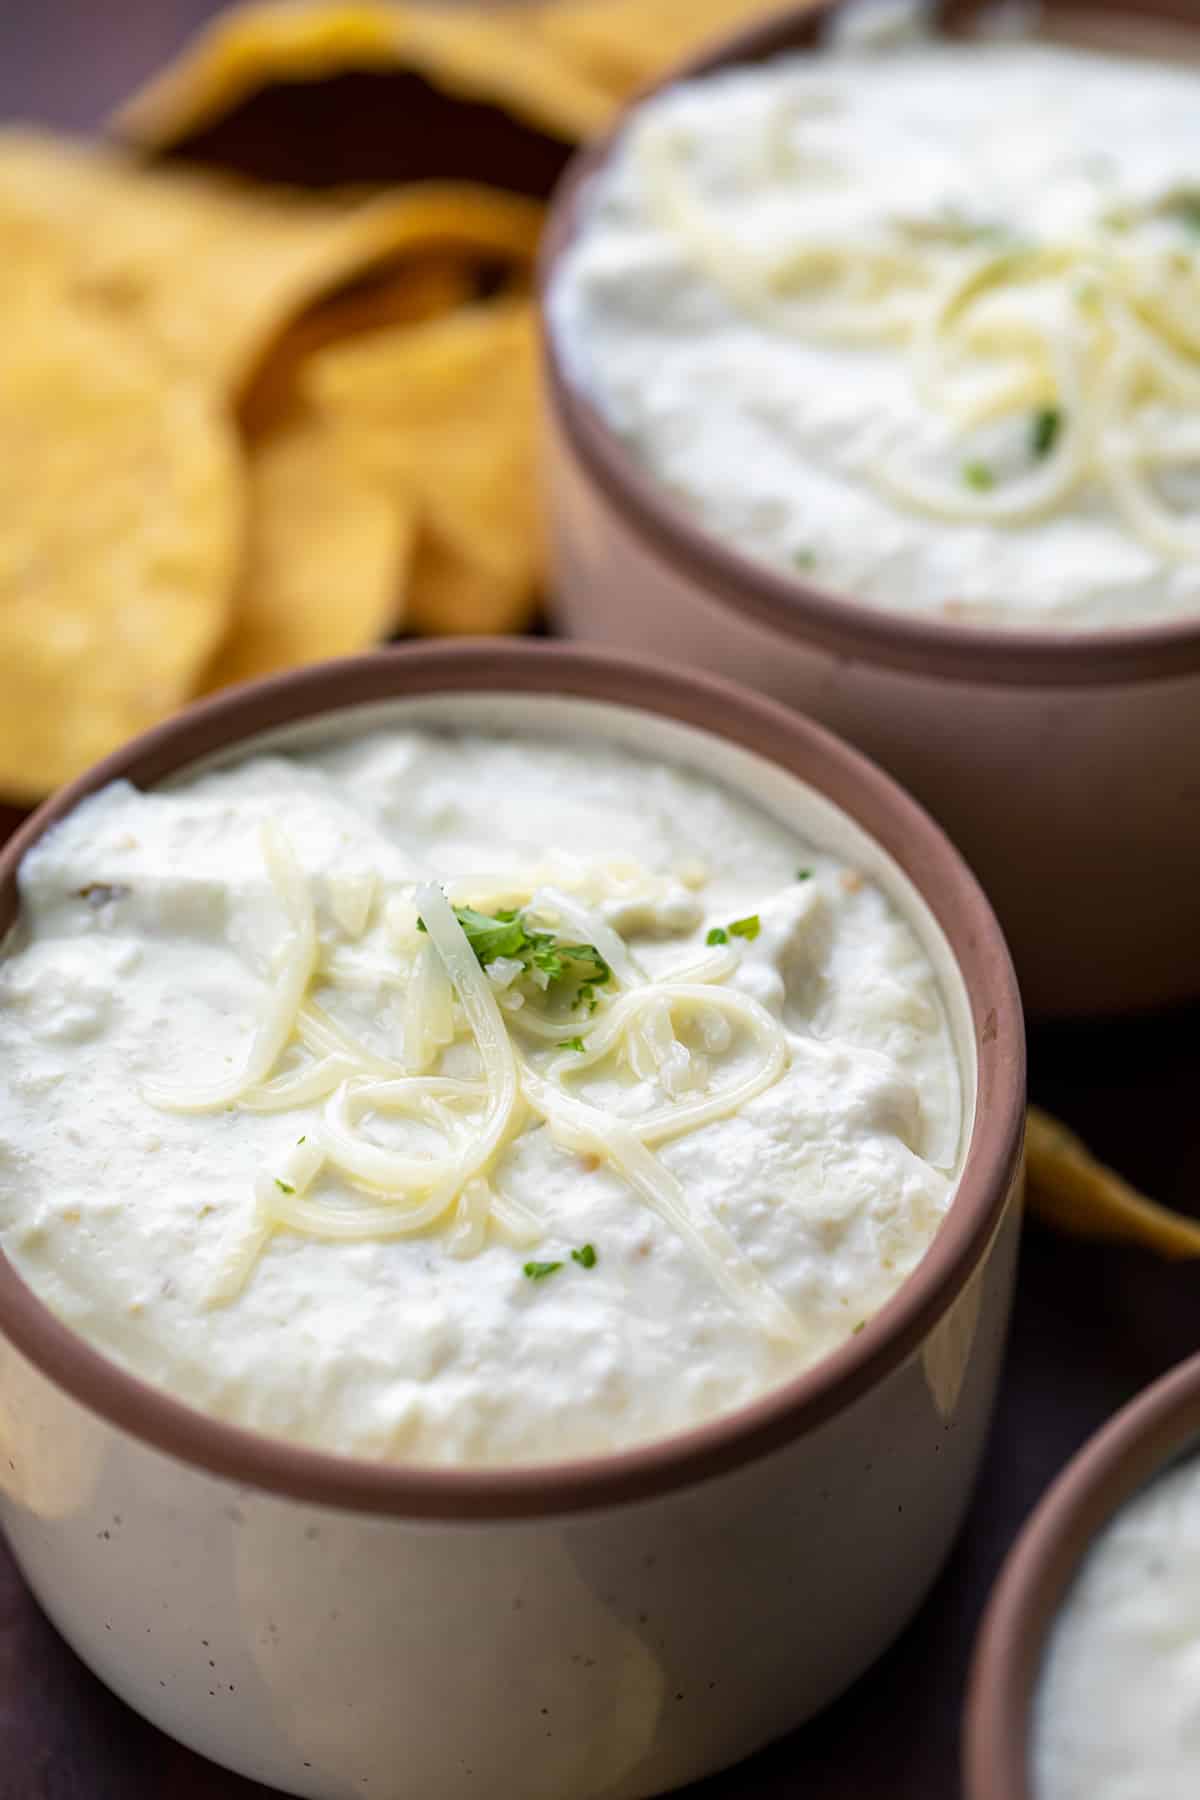 Mini Bowls of Easy Queso with Shredded Cheese and Surrounded by Chips.